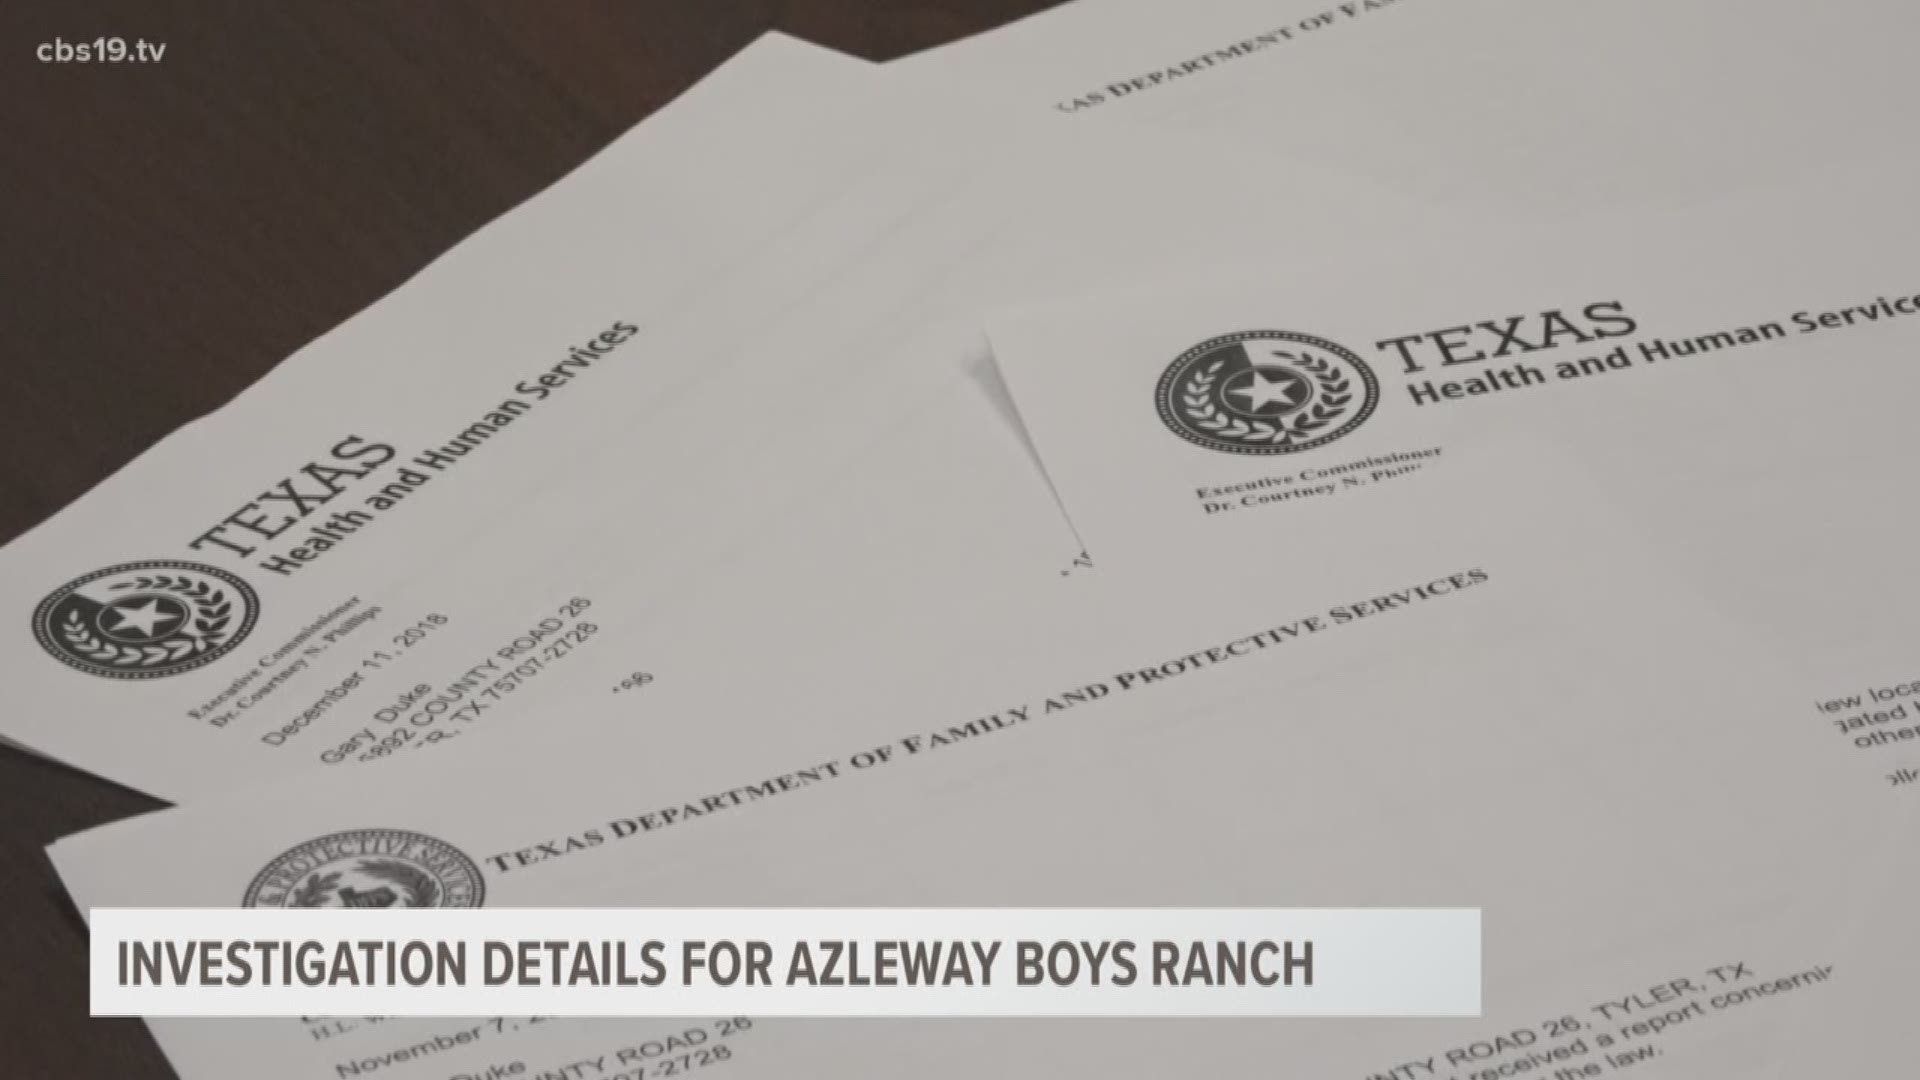 The state agency that oversees Azleway Boys Ranch has provided CBS19 with 103-documents outlining investigations into reports made regarding conduct at the ranch from 2016 to currently.